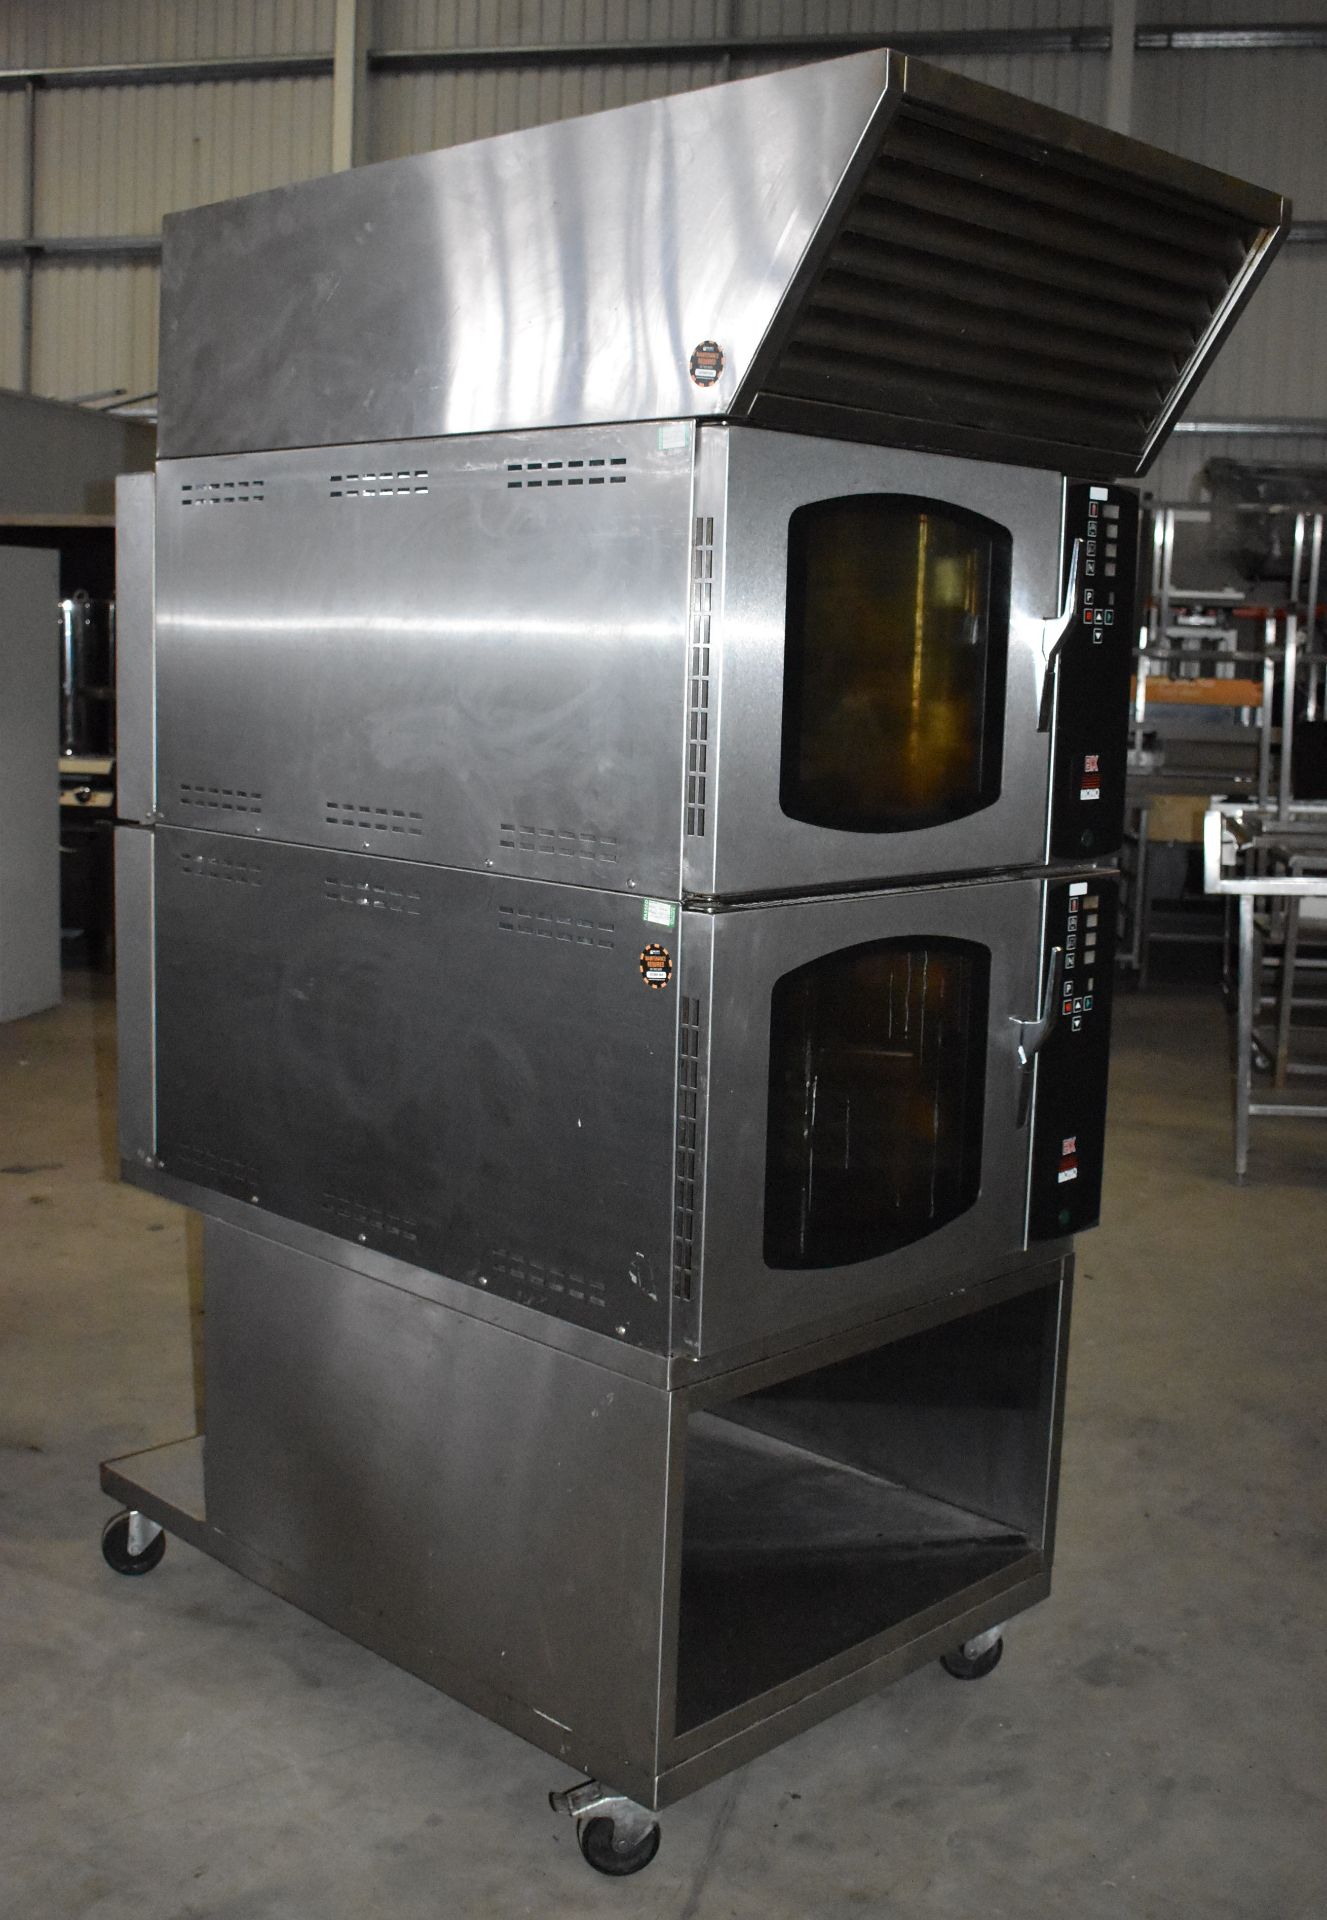 1 x Mono Double Classic and Steam BX Convection Oven - Model FG159C - 3 Phase Power - H210 x W83 x - Image 6 of 15